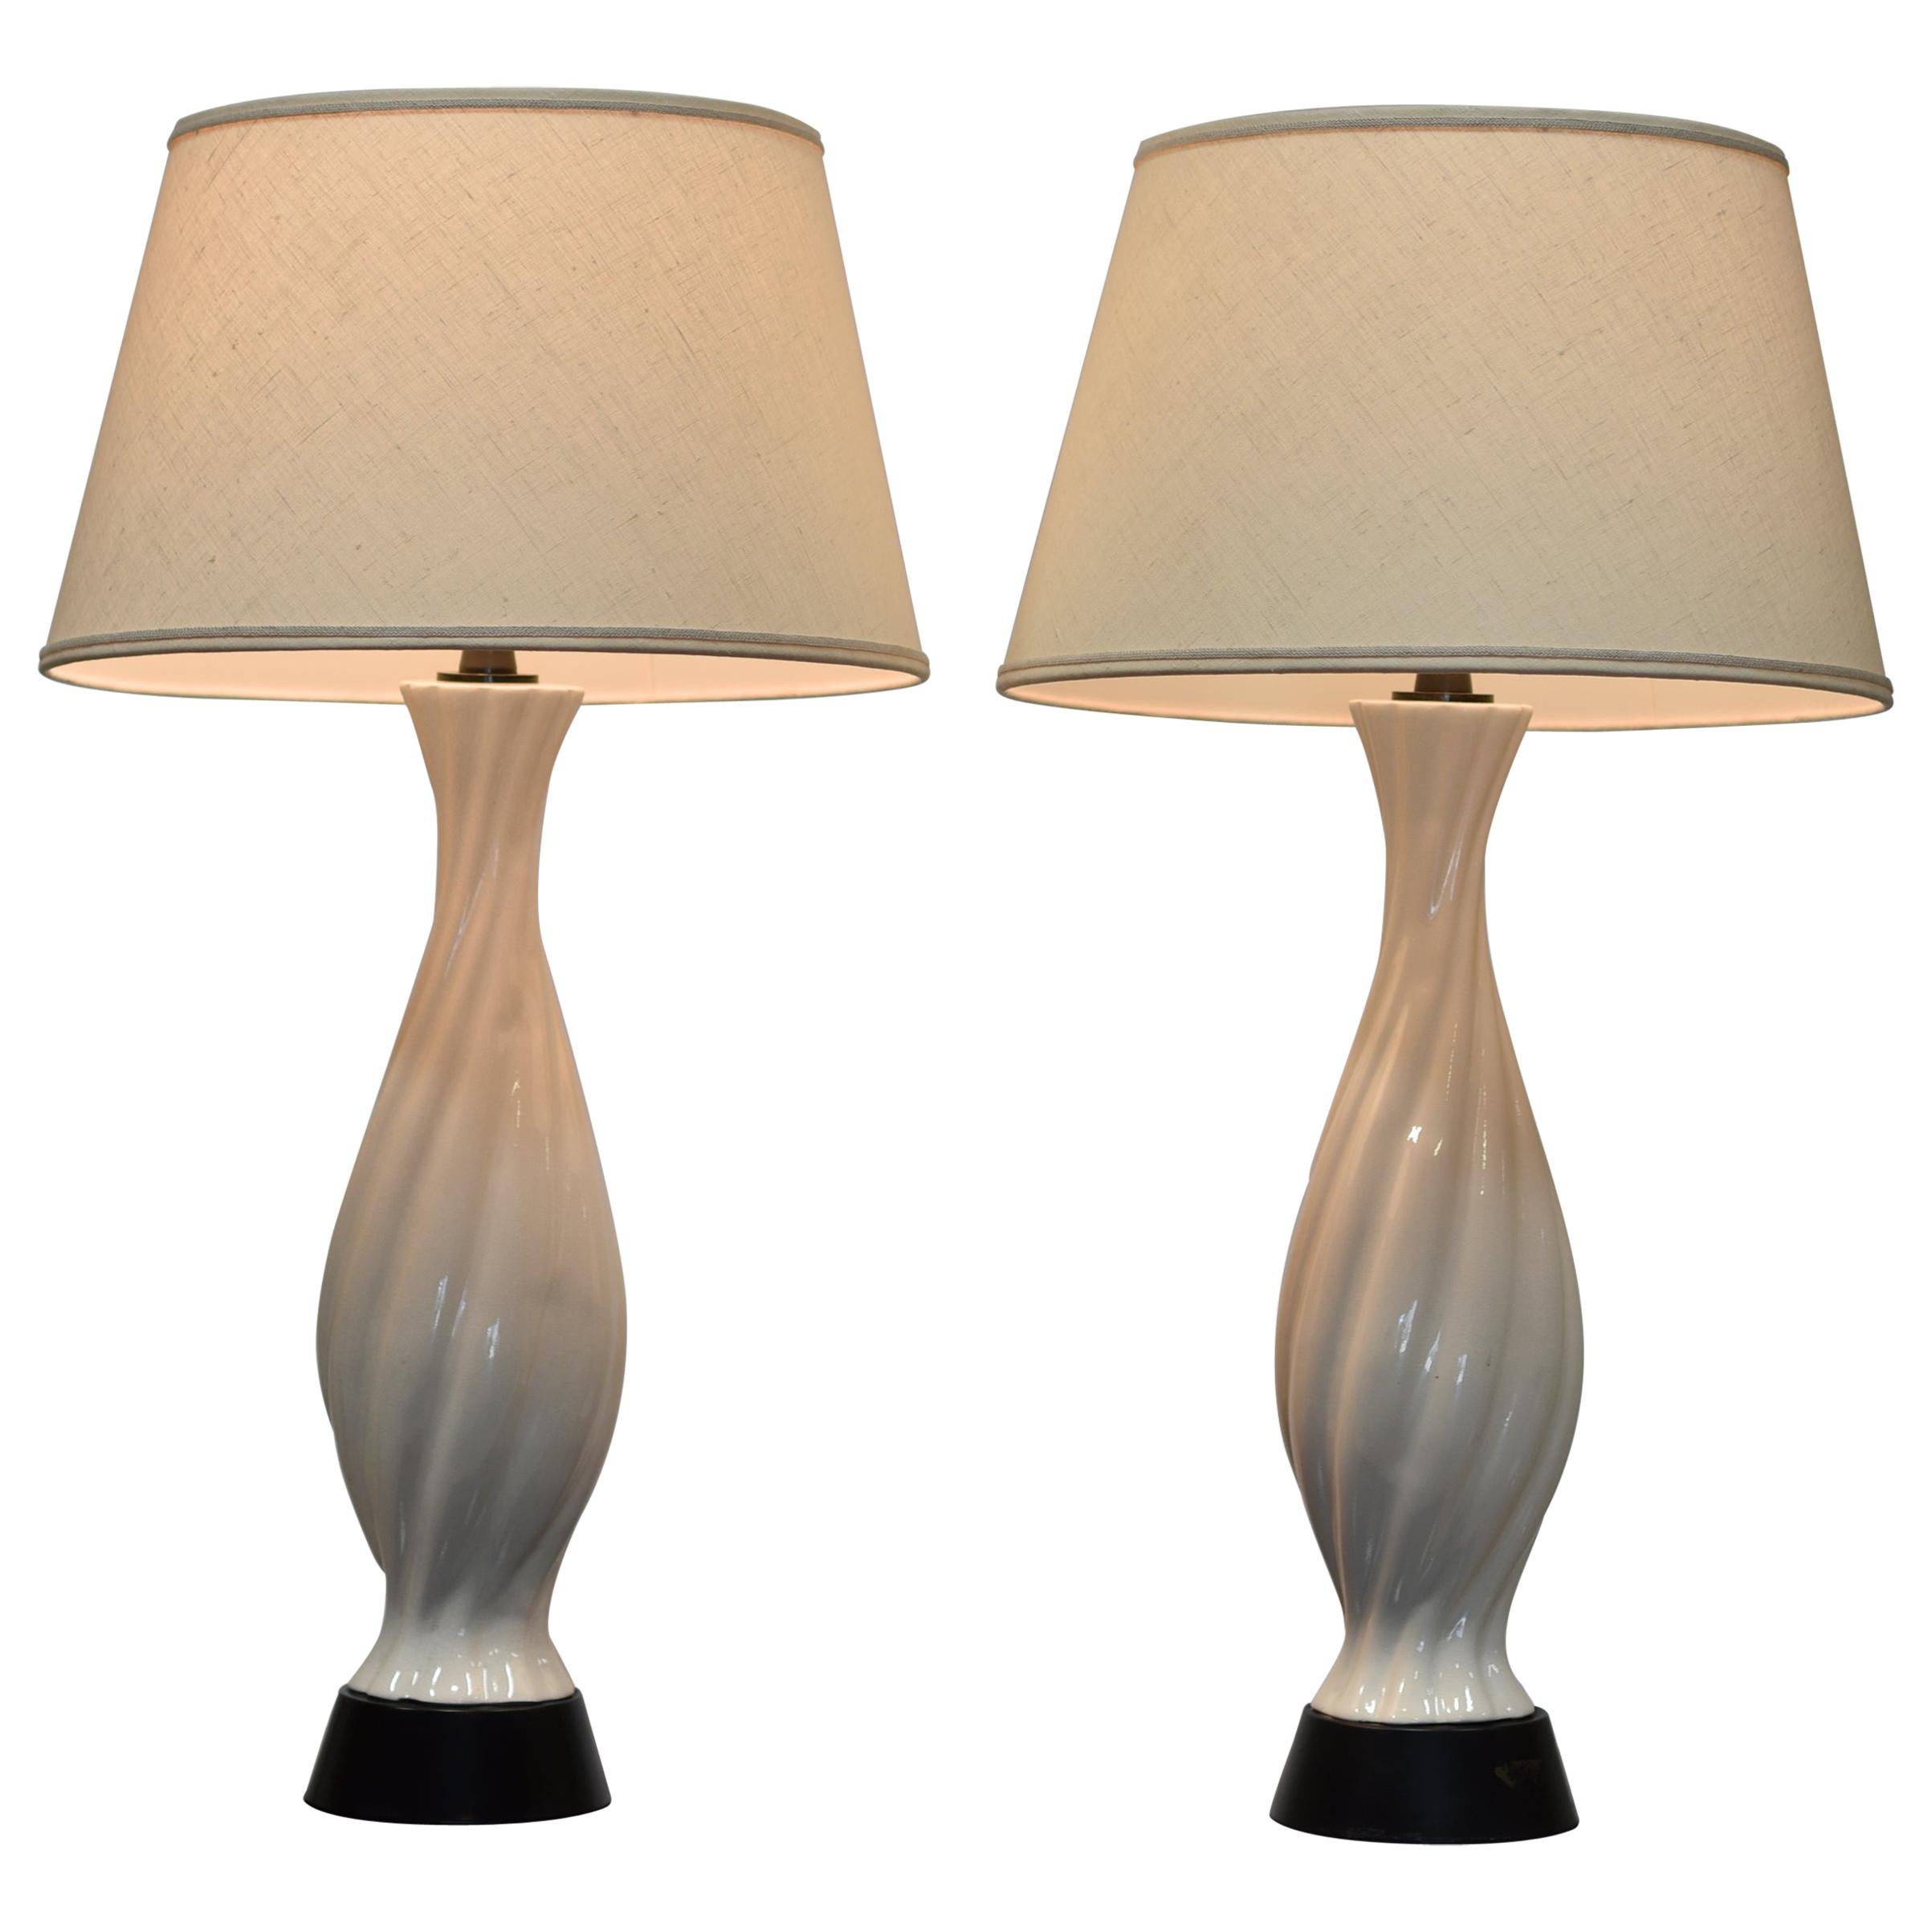 Pair of White Porcelain Baluster Form Table Lamps